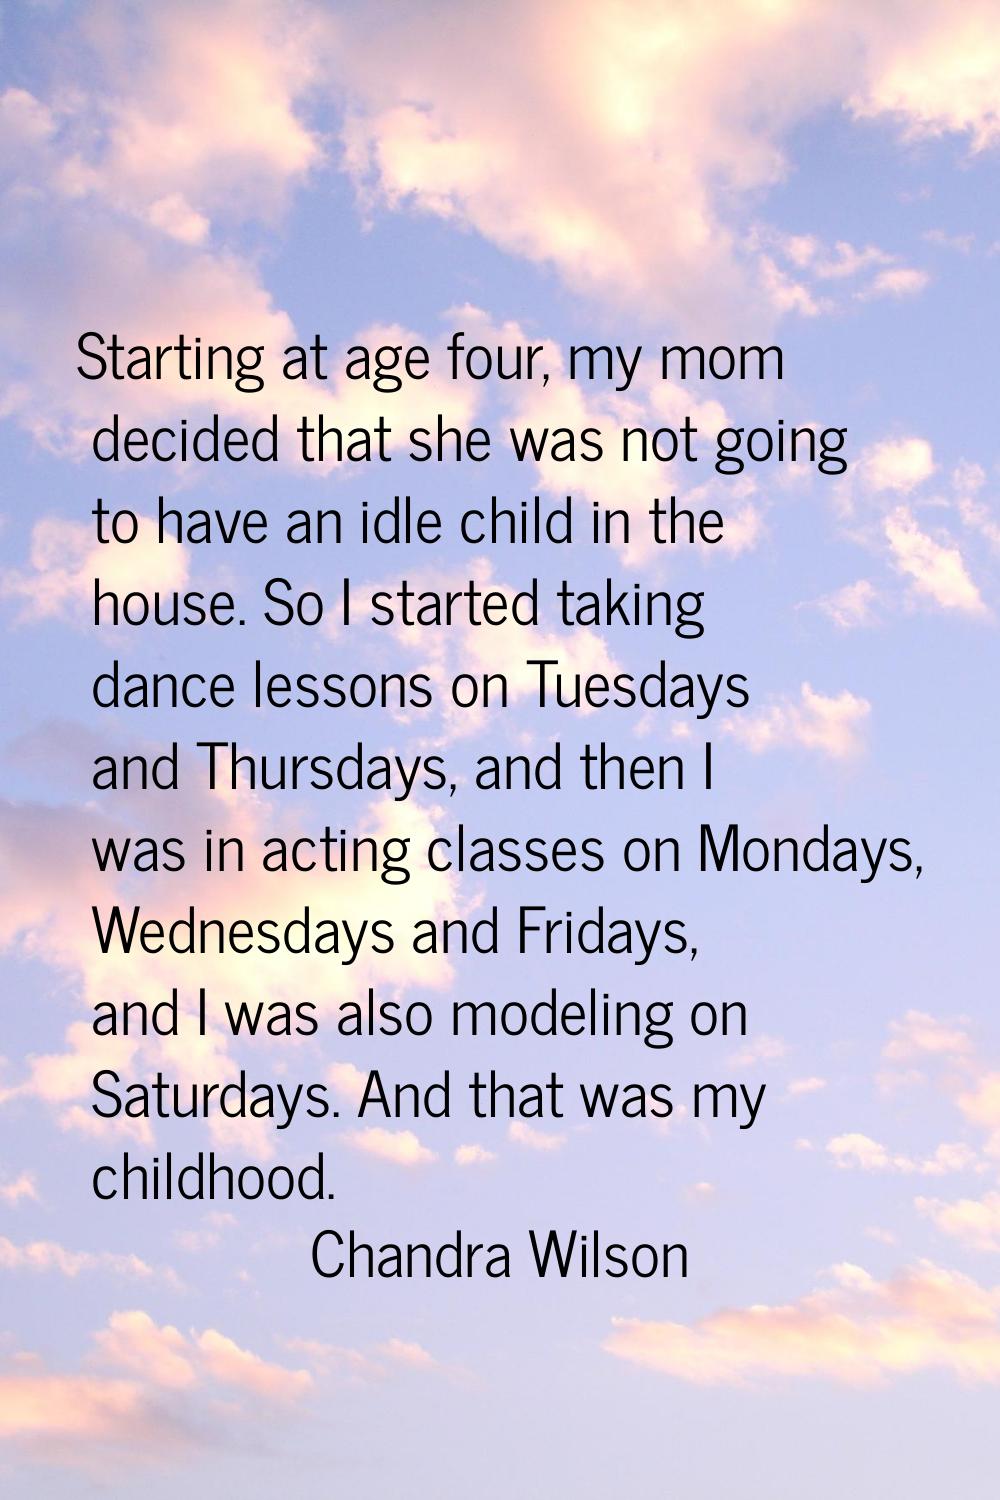 Starting at age four, my mom decided that she was not going to have an idle child in the house. So 